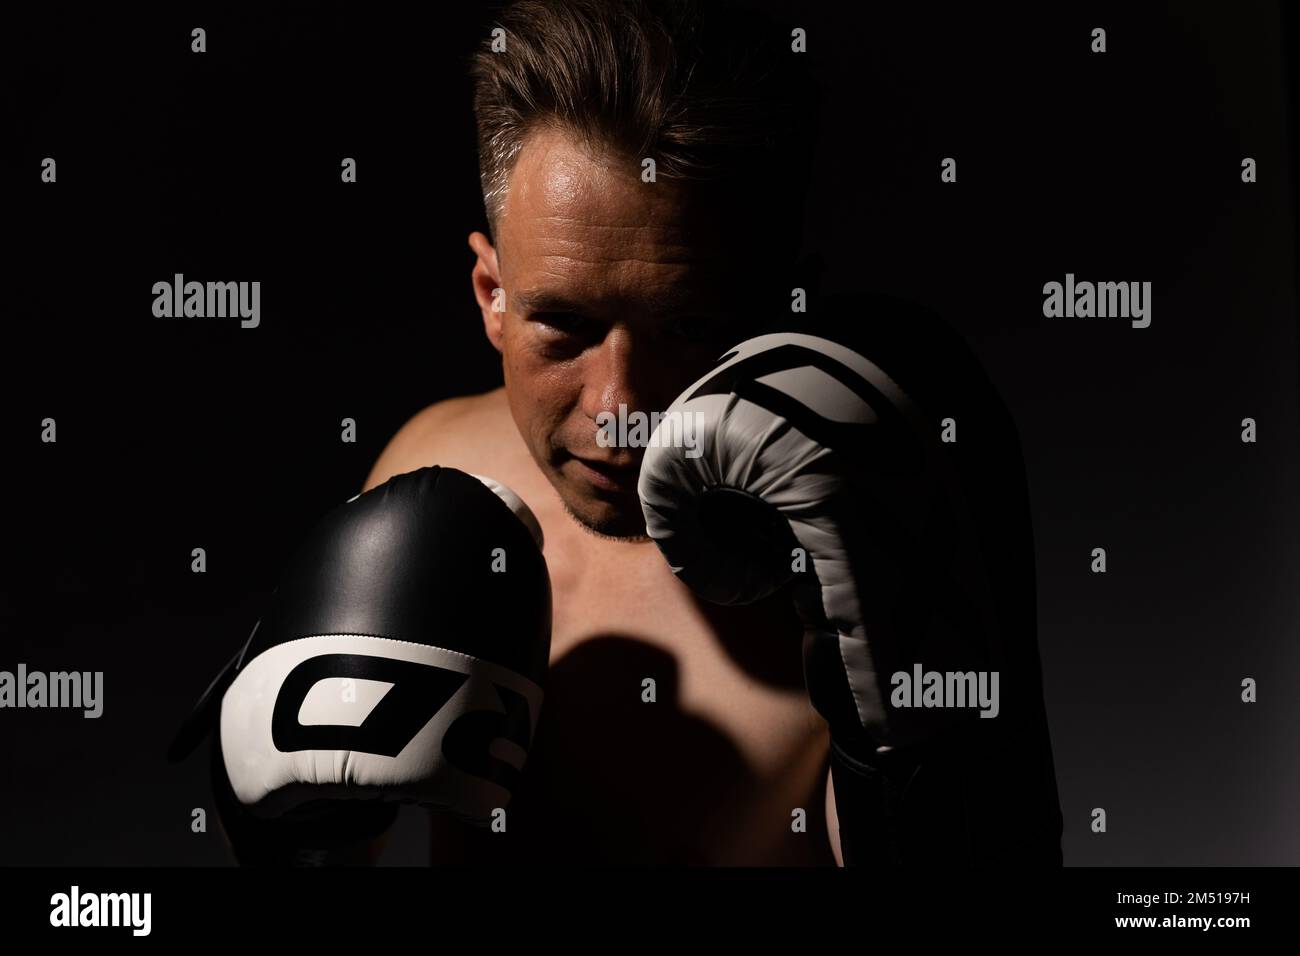 Portrait of muscular handsome topless male wearing boxing gloves isolated against a black background Stock Photo